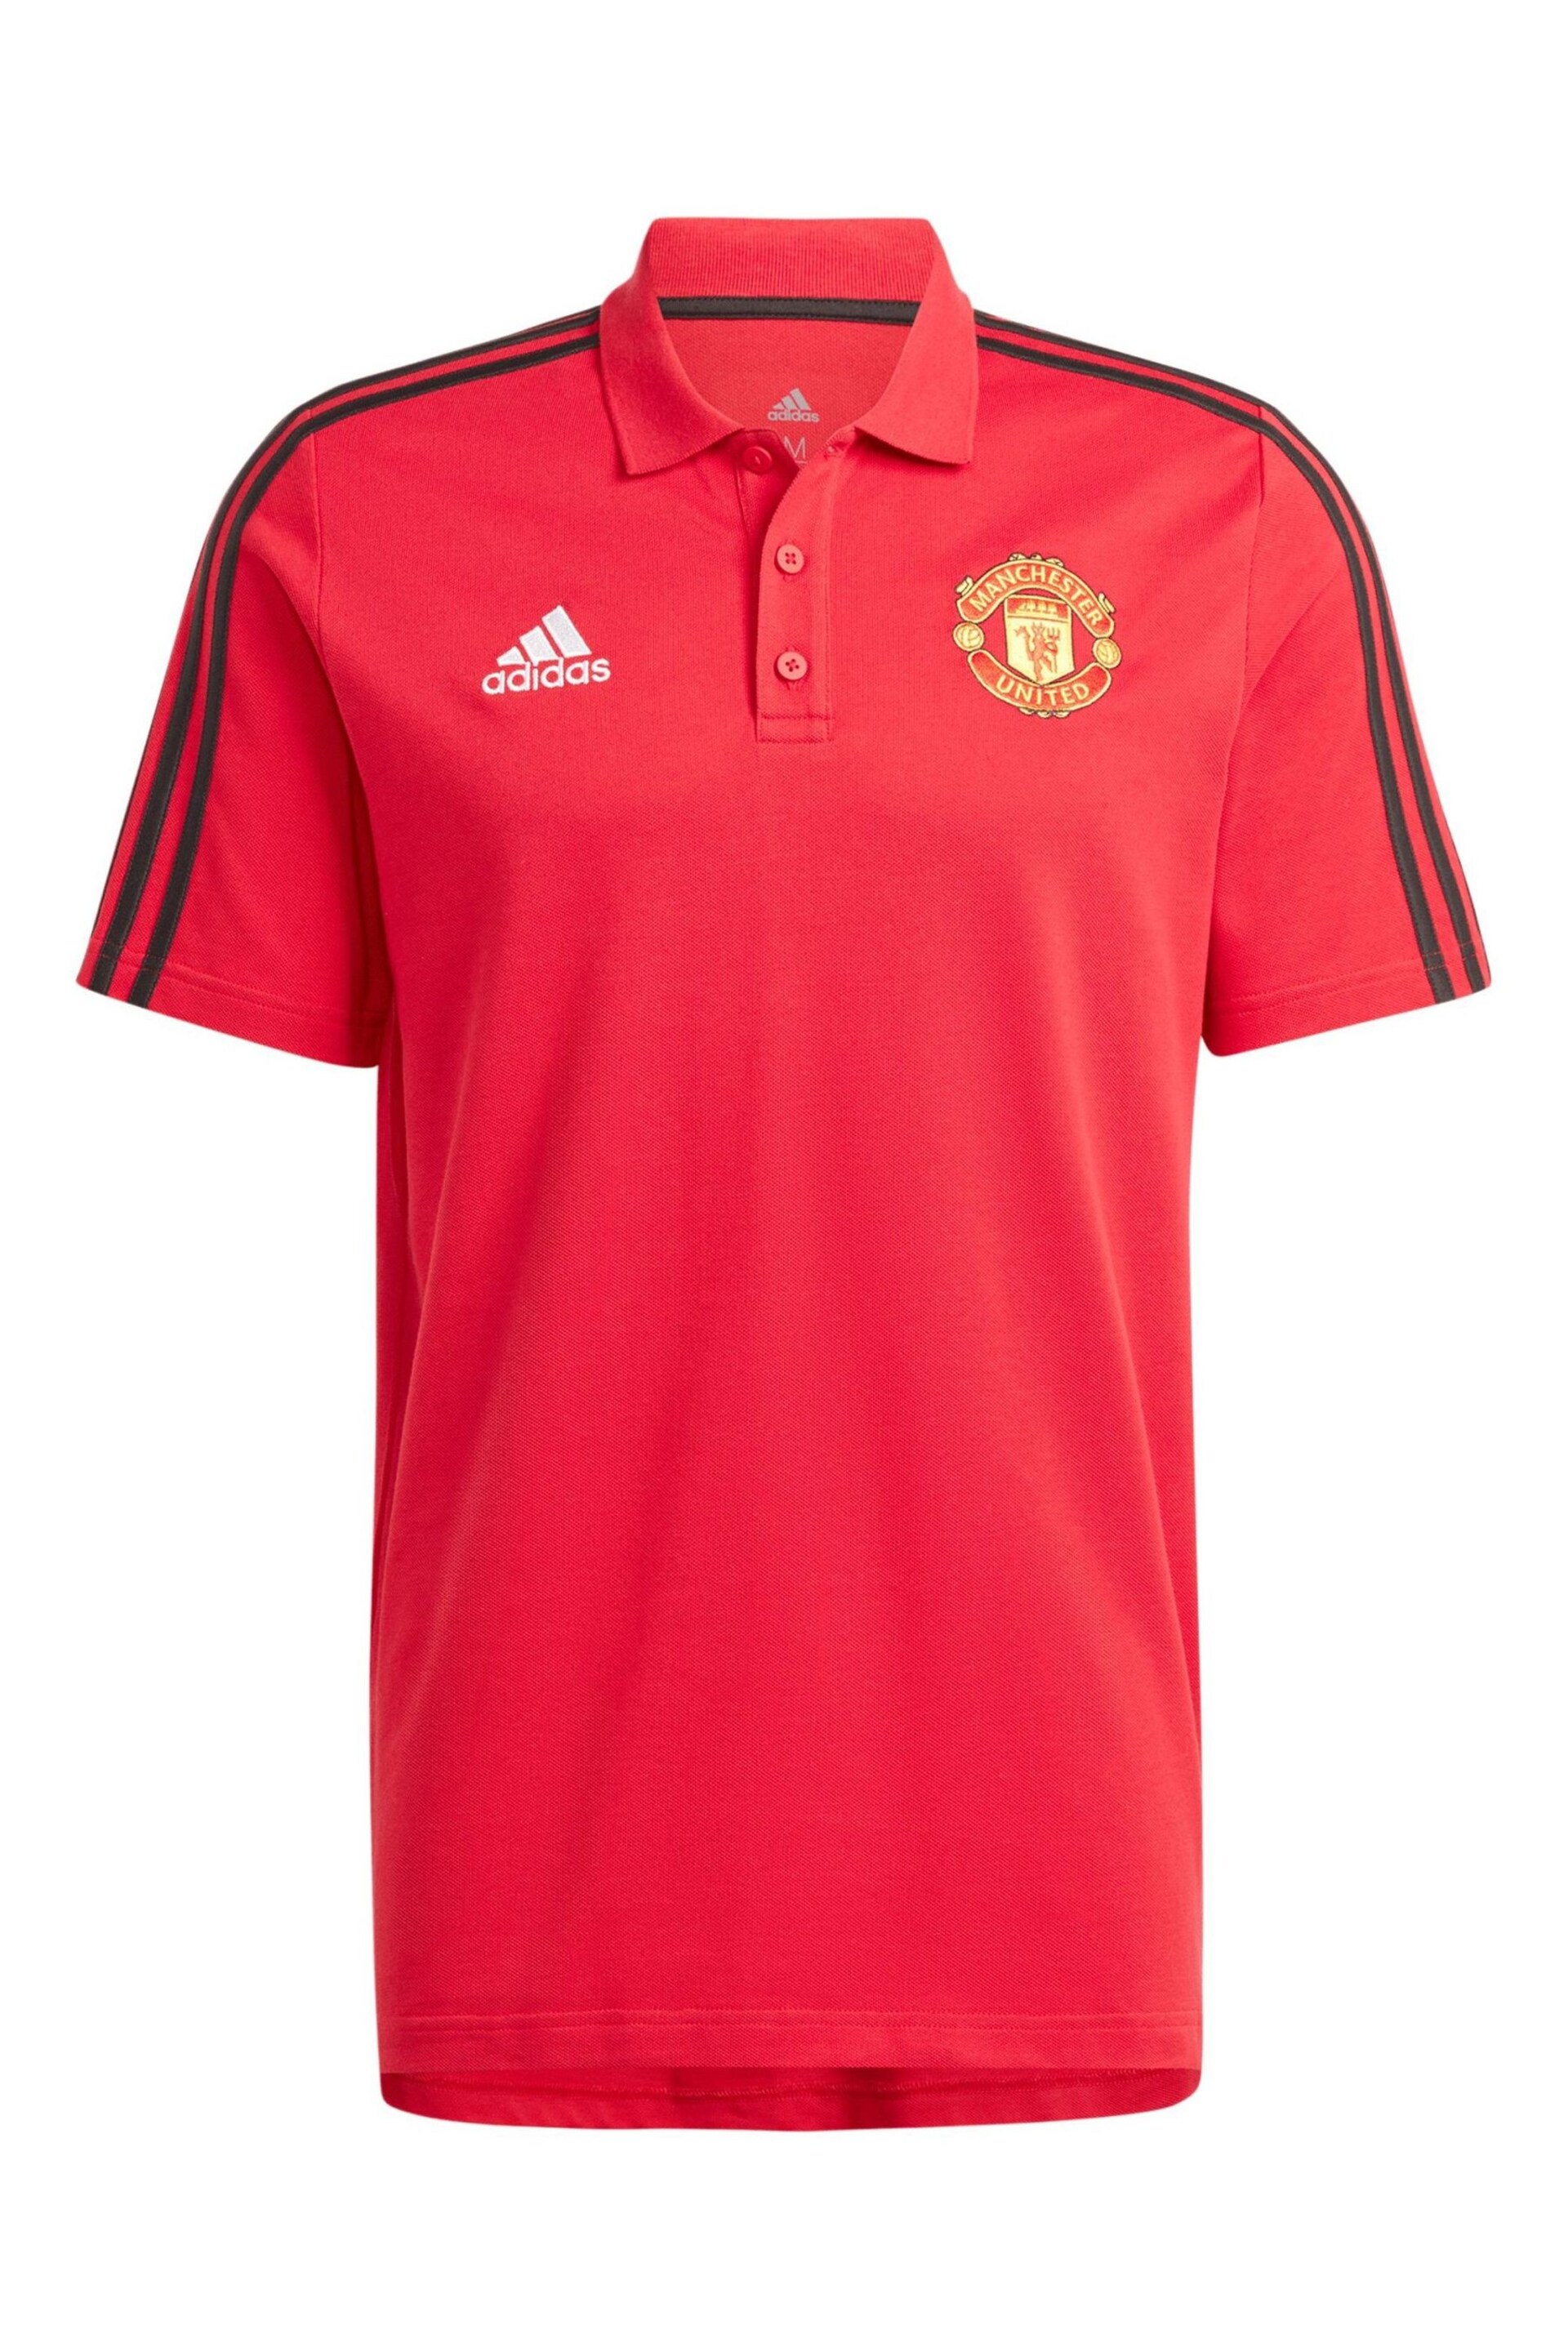 adidas Red Manchester United DNA 3 Stripe Polo Shirt - Image 3 of 3